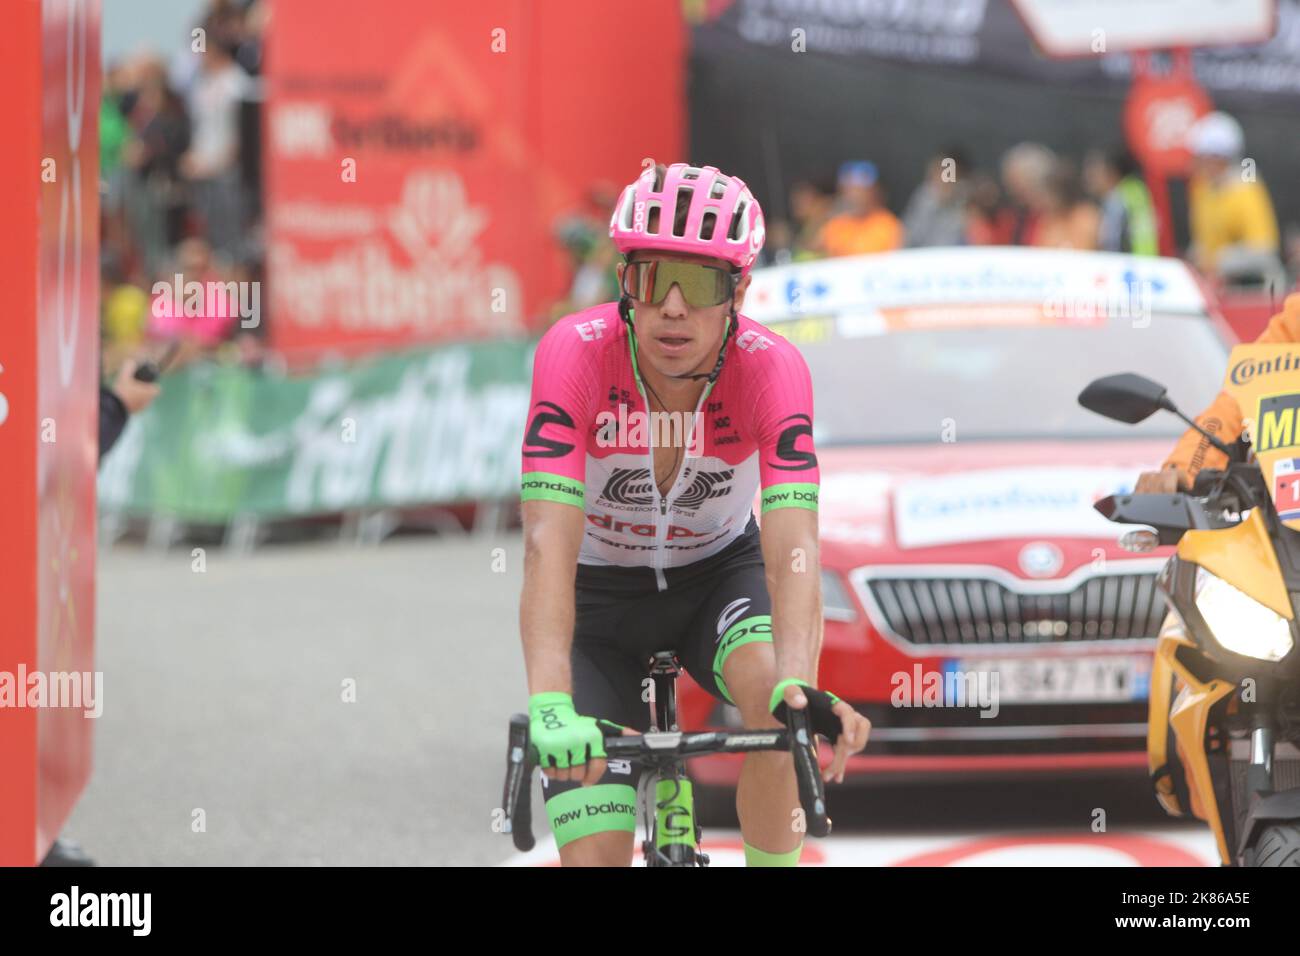 EF Drapac's Rigo Uran finishes fifth during Stage 19 of the Vuelta a Espana (Tour of Spain) from Escaldes-Engordany to Coll De La Gallina on September 15, 2018. Stock Photo